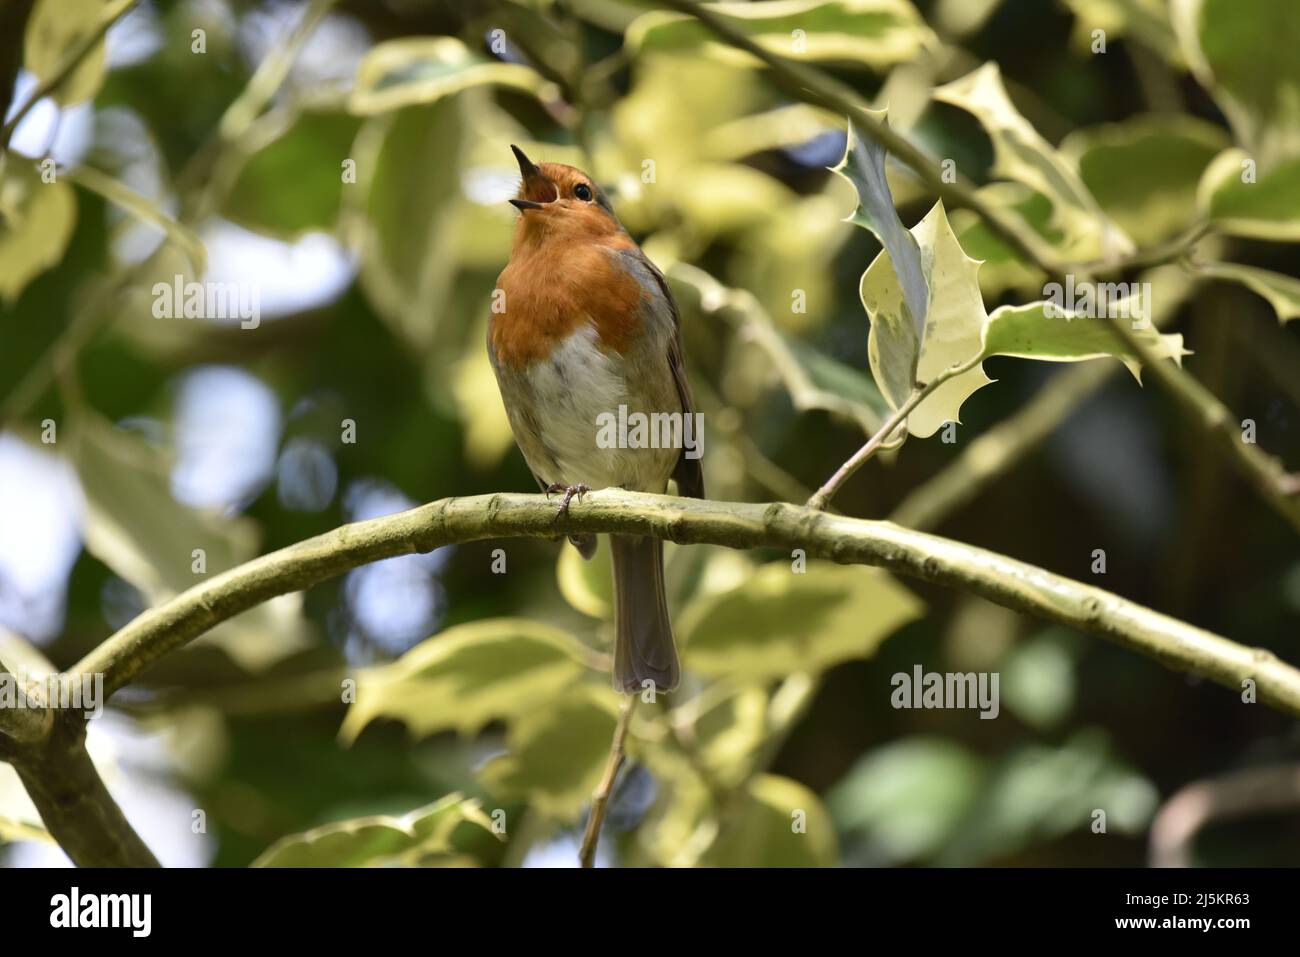 Close-Up Image of a European Robin (Erithacus rubecula) Facing Camera, Singing from within a Holly Bush, Perched on an Arched Horizontal Branch, UK Stock Photo